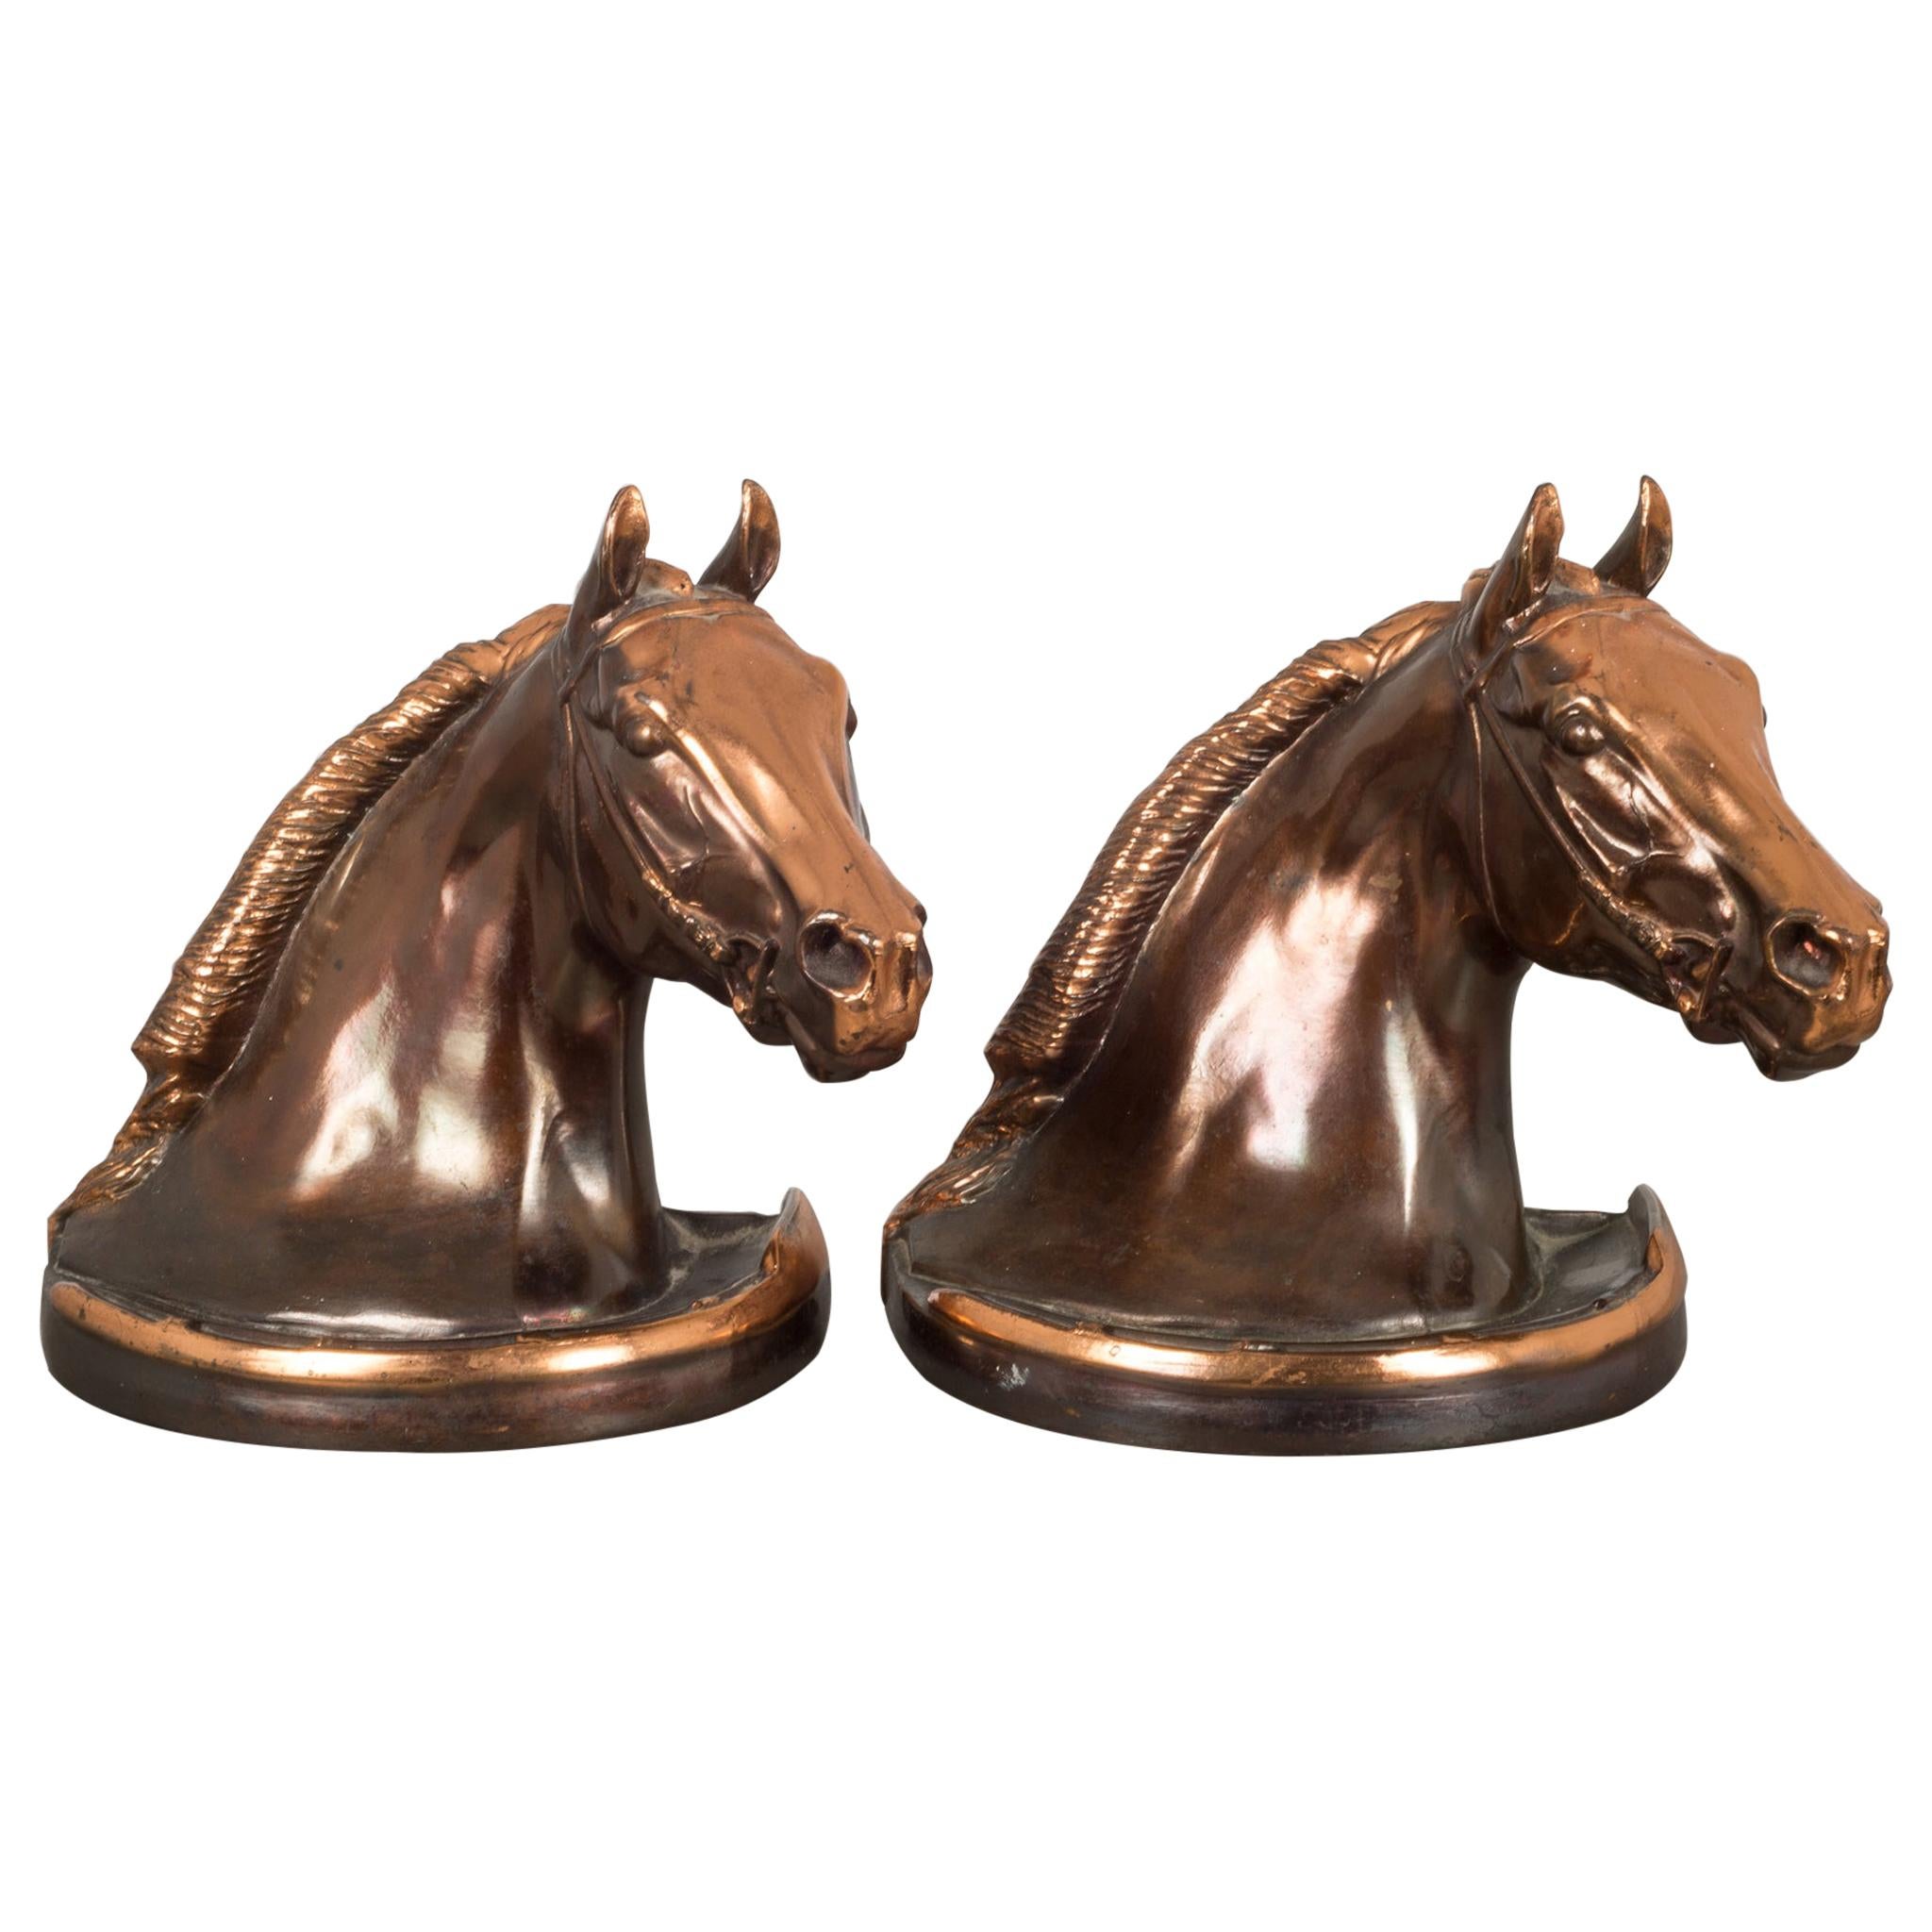 Bronze-Plated Horse Head Bookends by Glady's Brown and Dodge, circa 1946